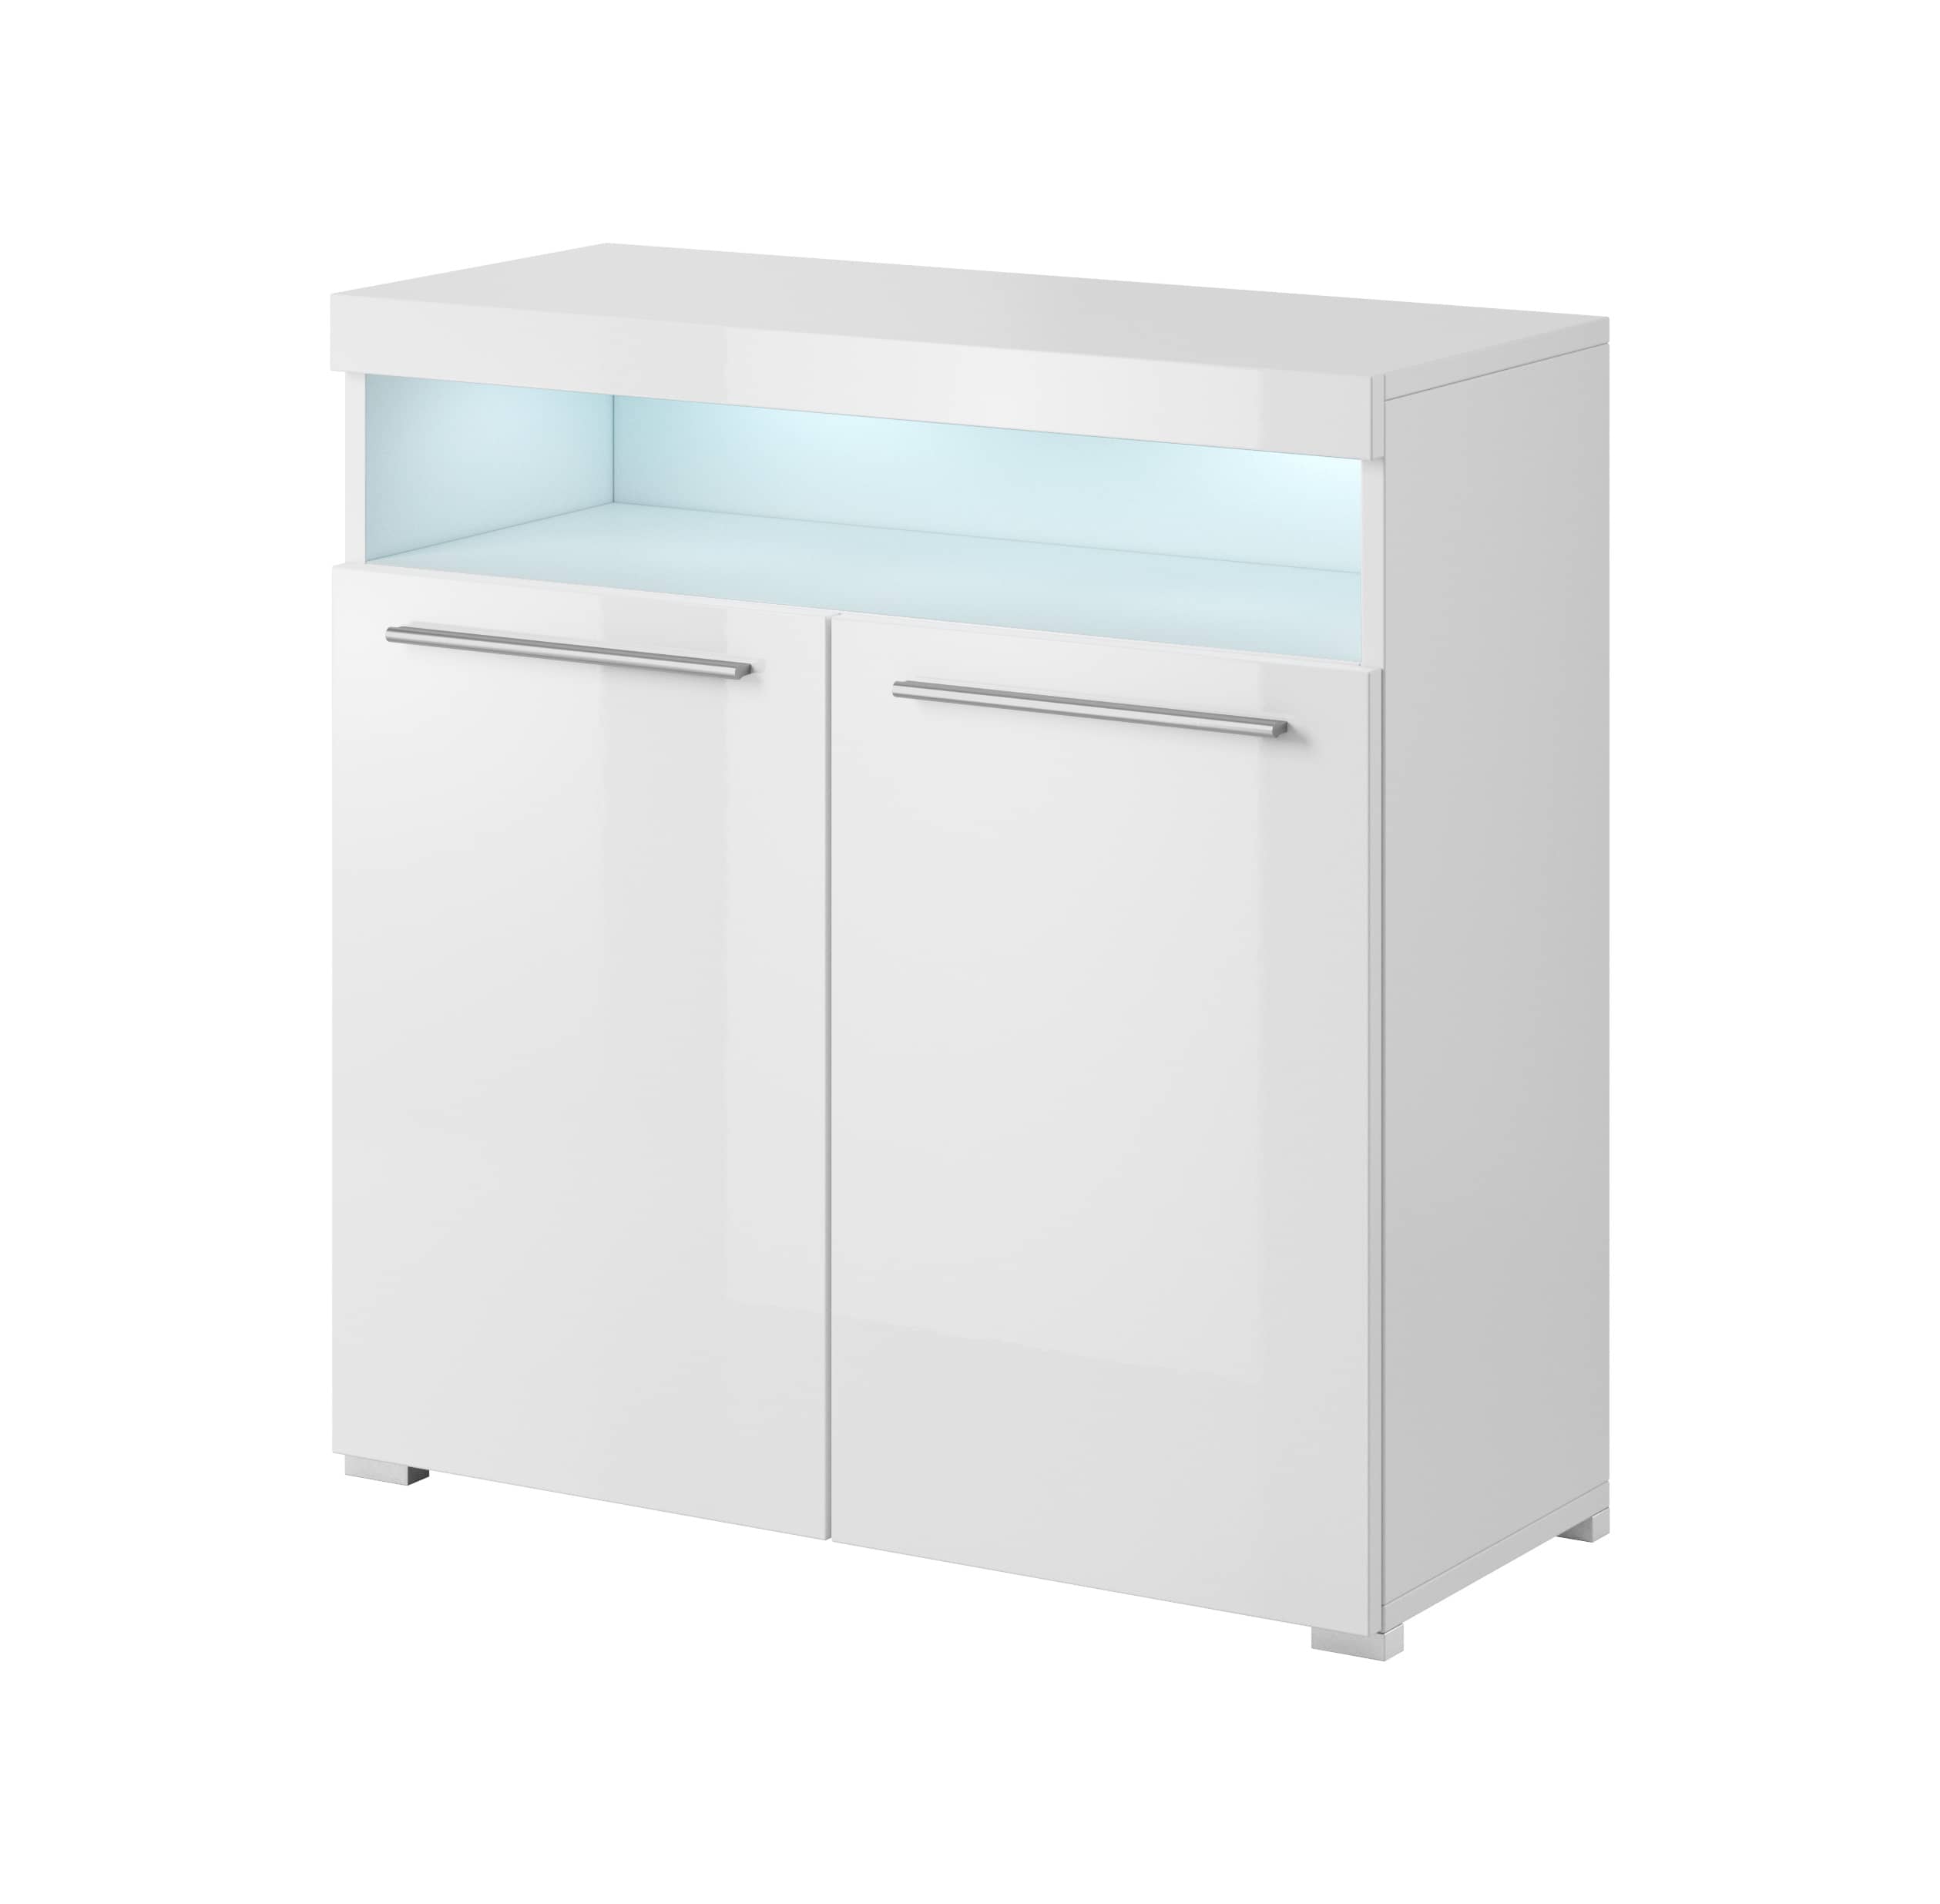 View India 45 Sideboard Cabinet 91cm White information